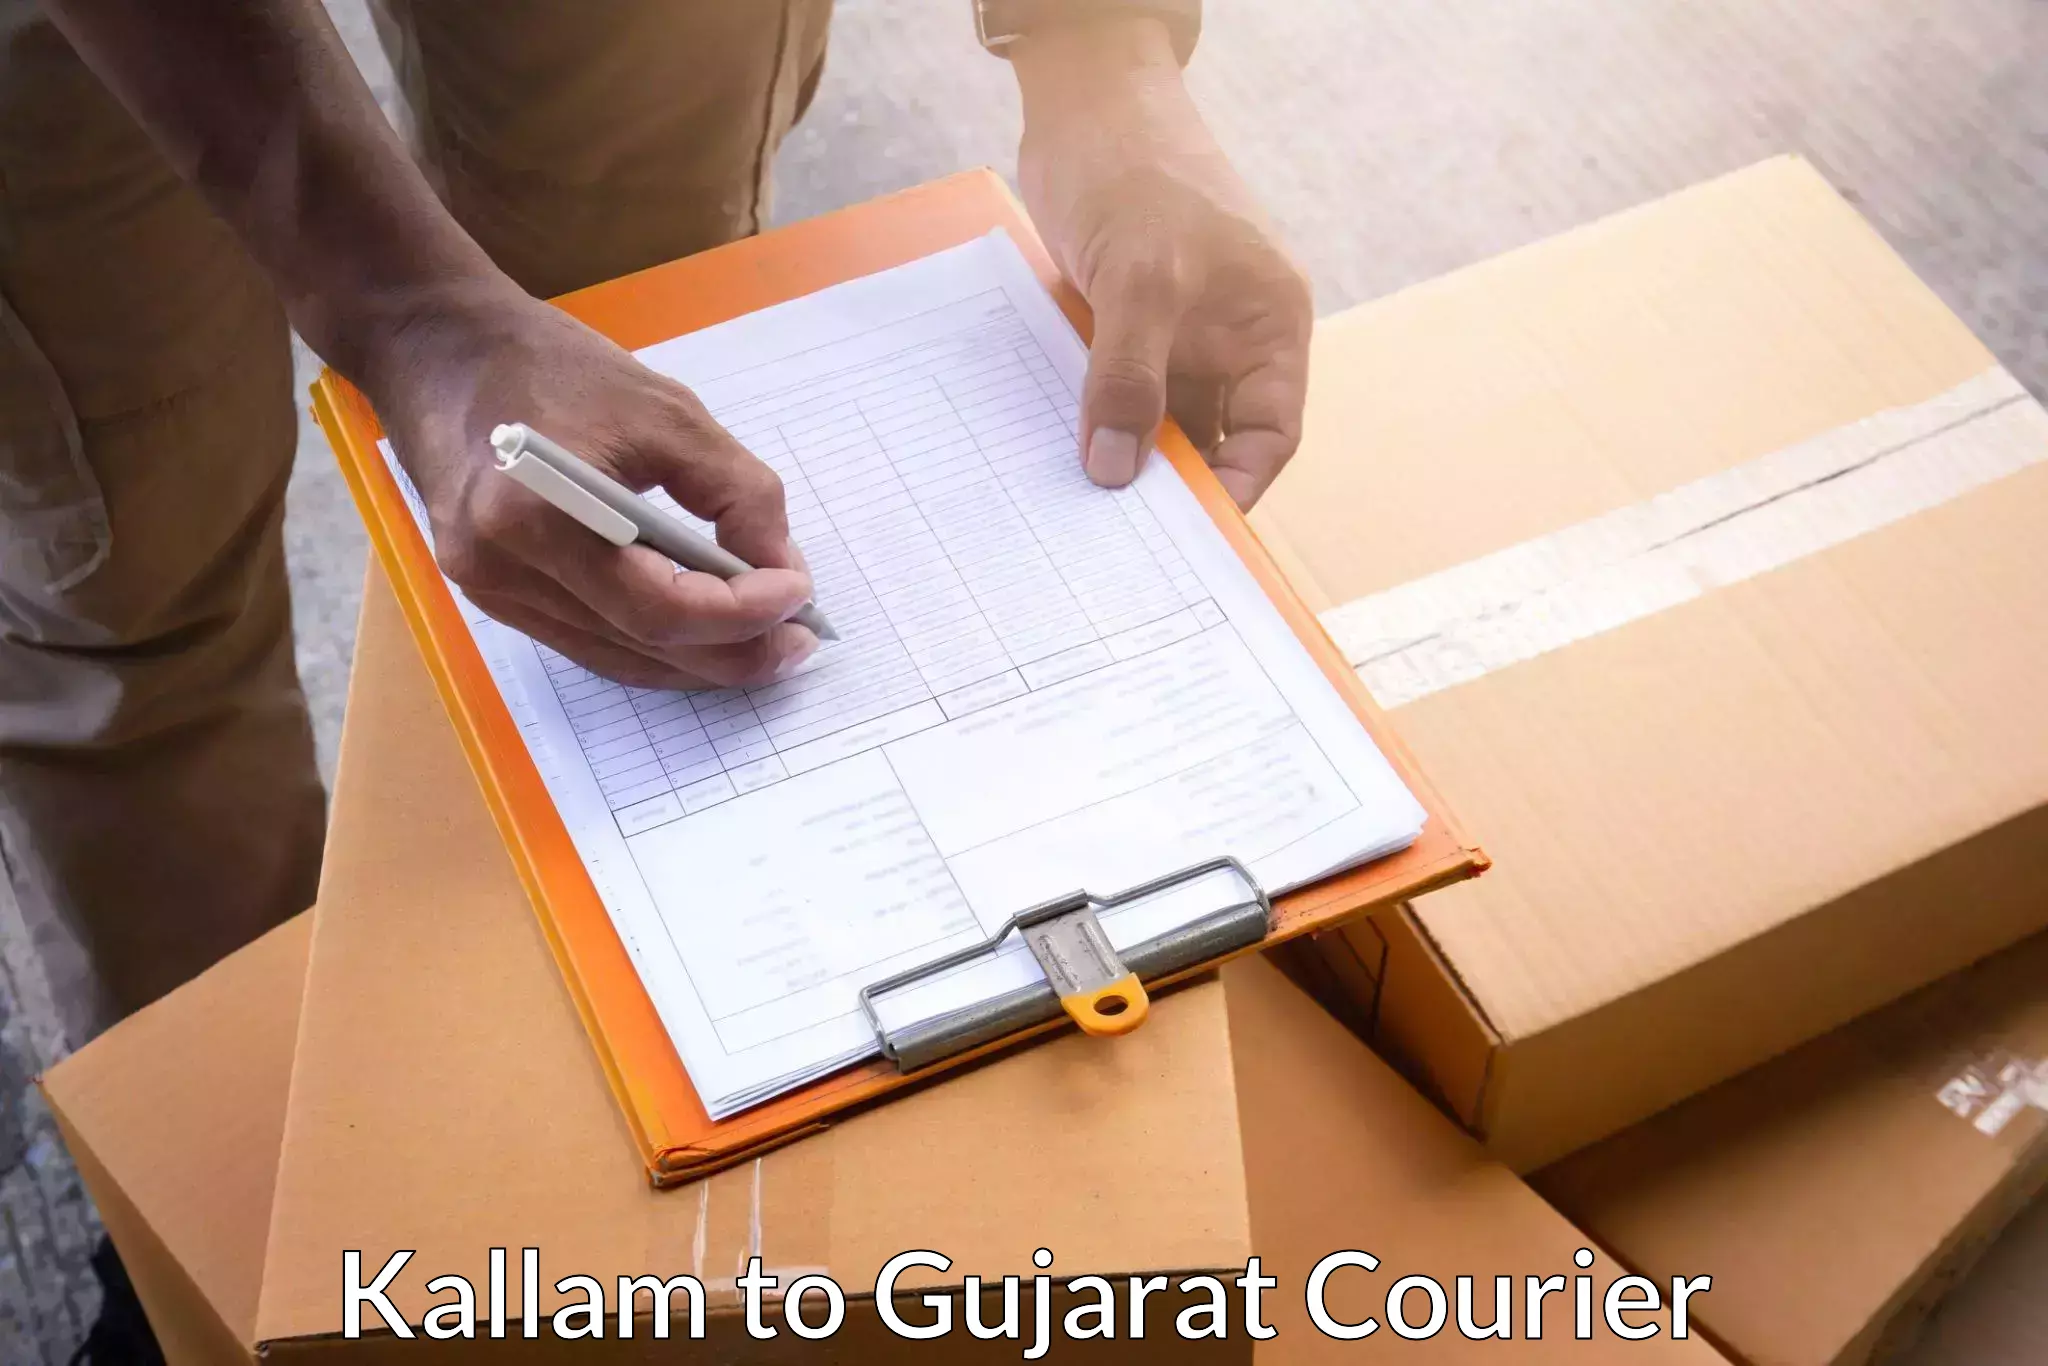 Global courier networks Kallam to Patdi